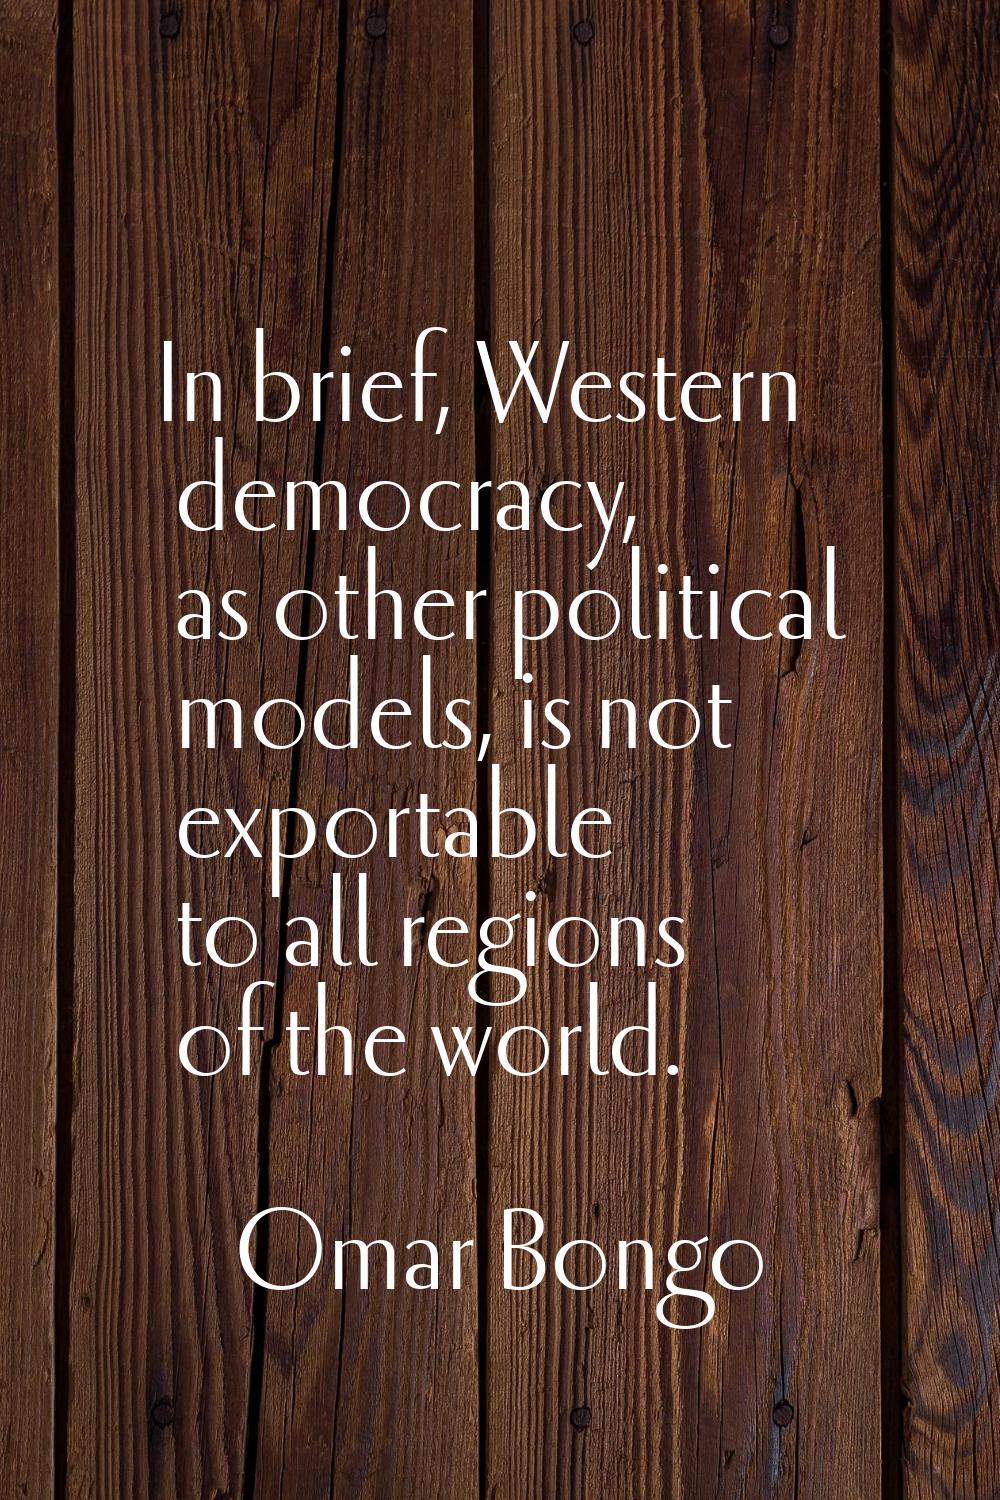 In brief, Western democracy, as other political models, is not exportable to all regions of the wor